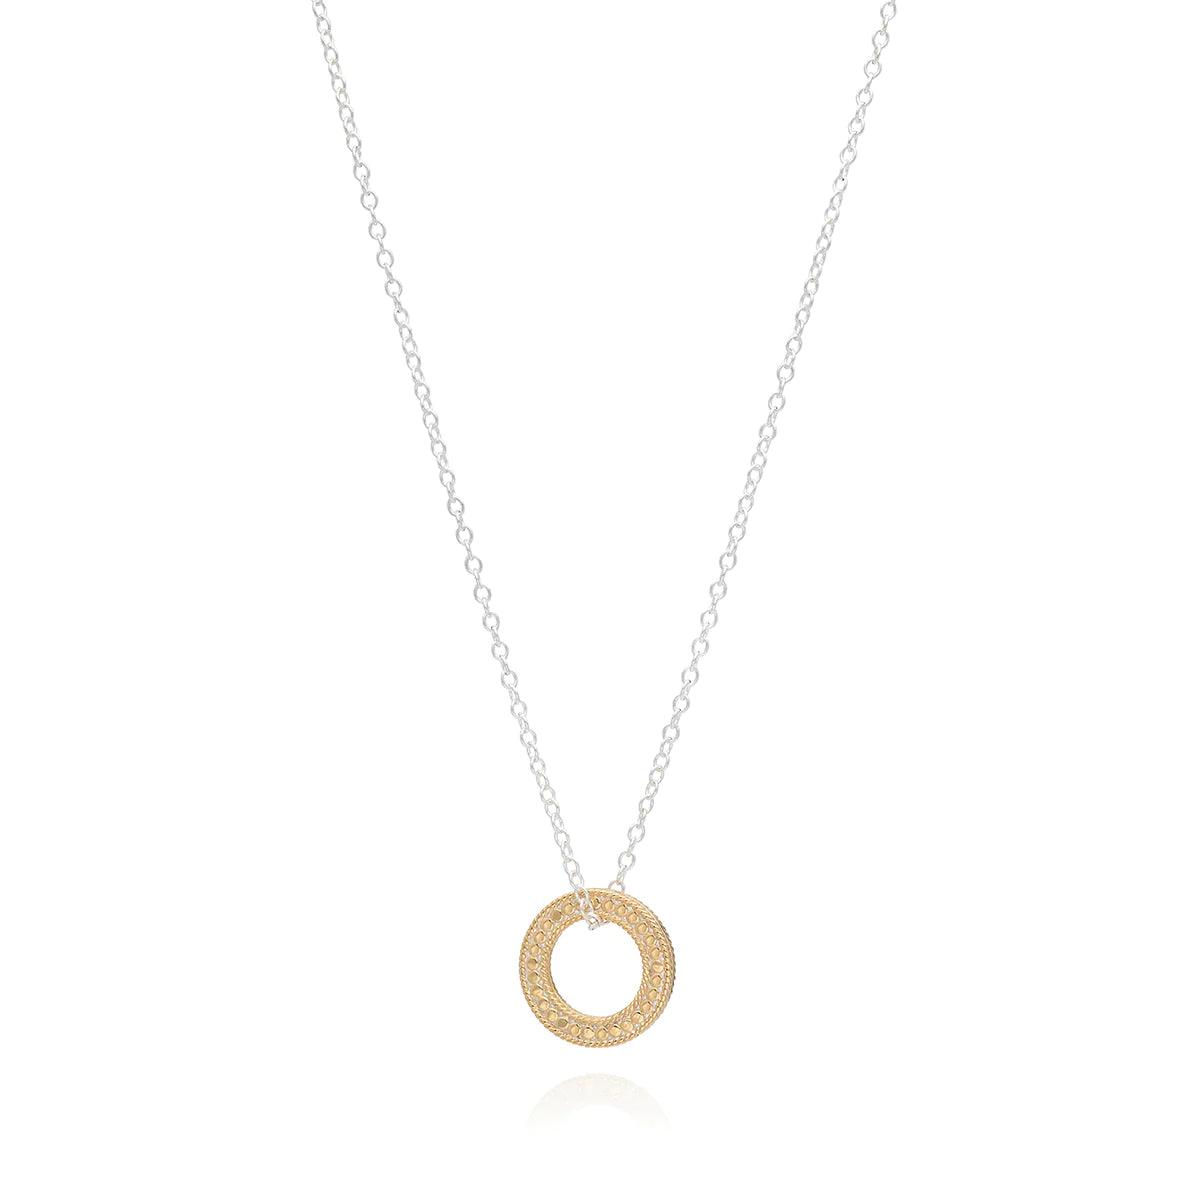 Circle of Life Open "O" Charity Necklace - Gold & Silver